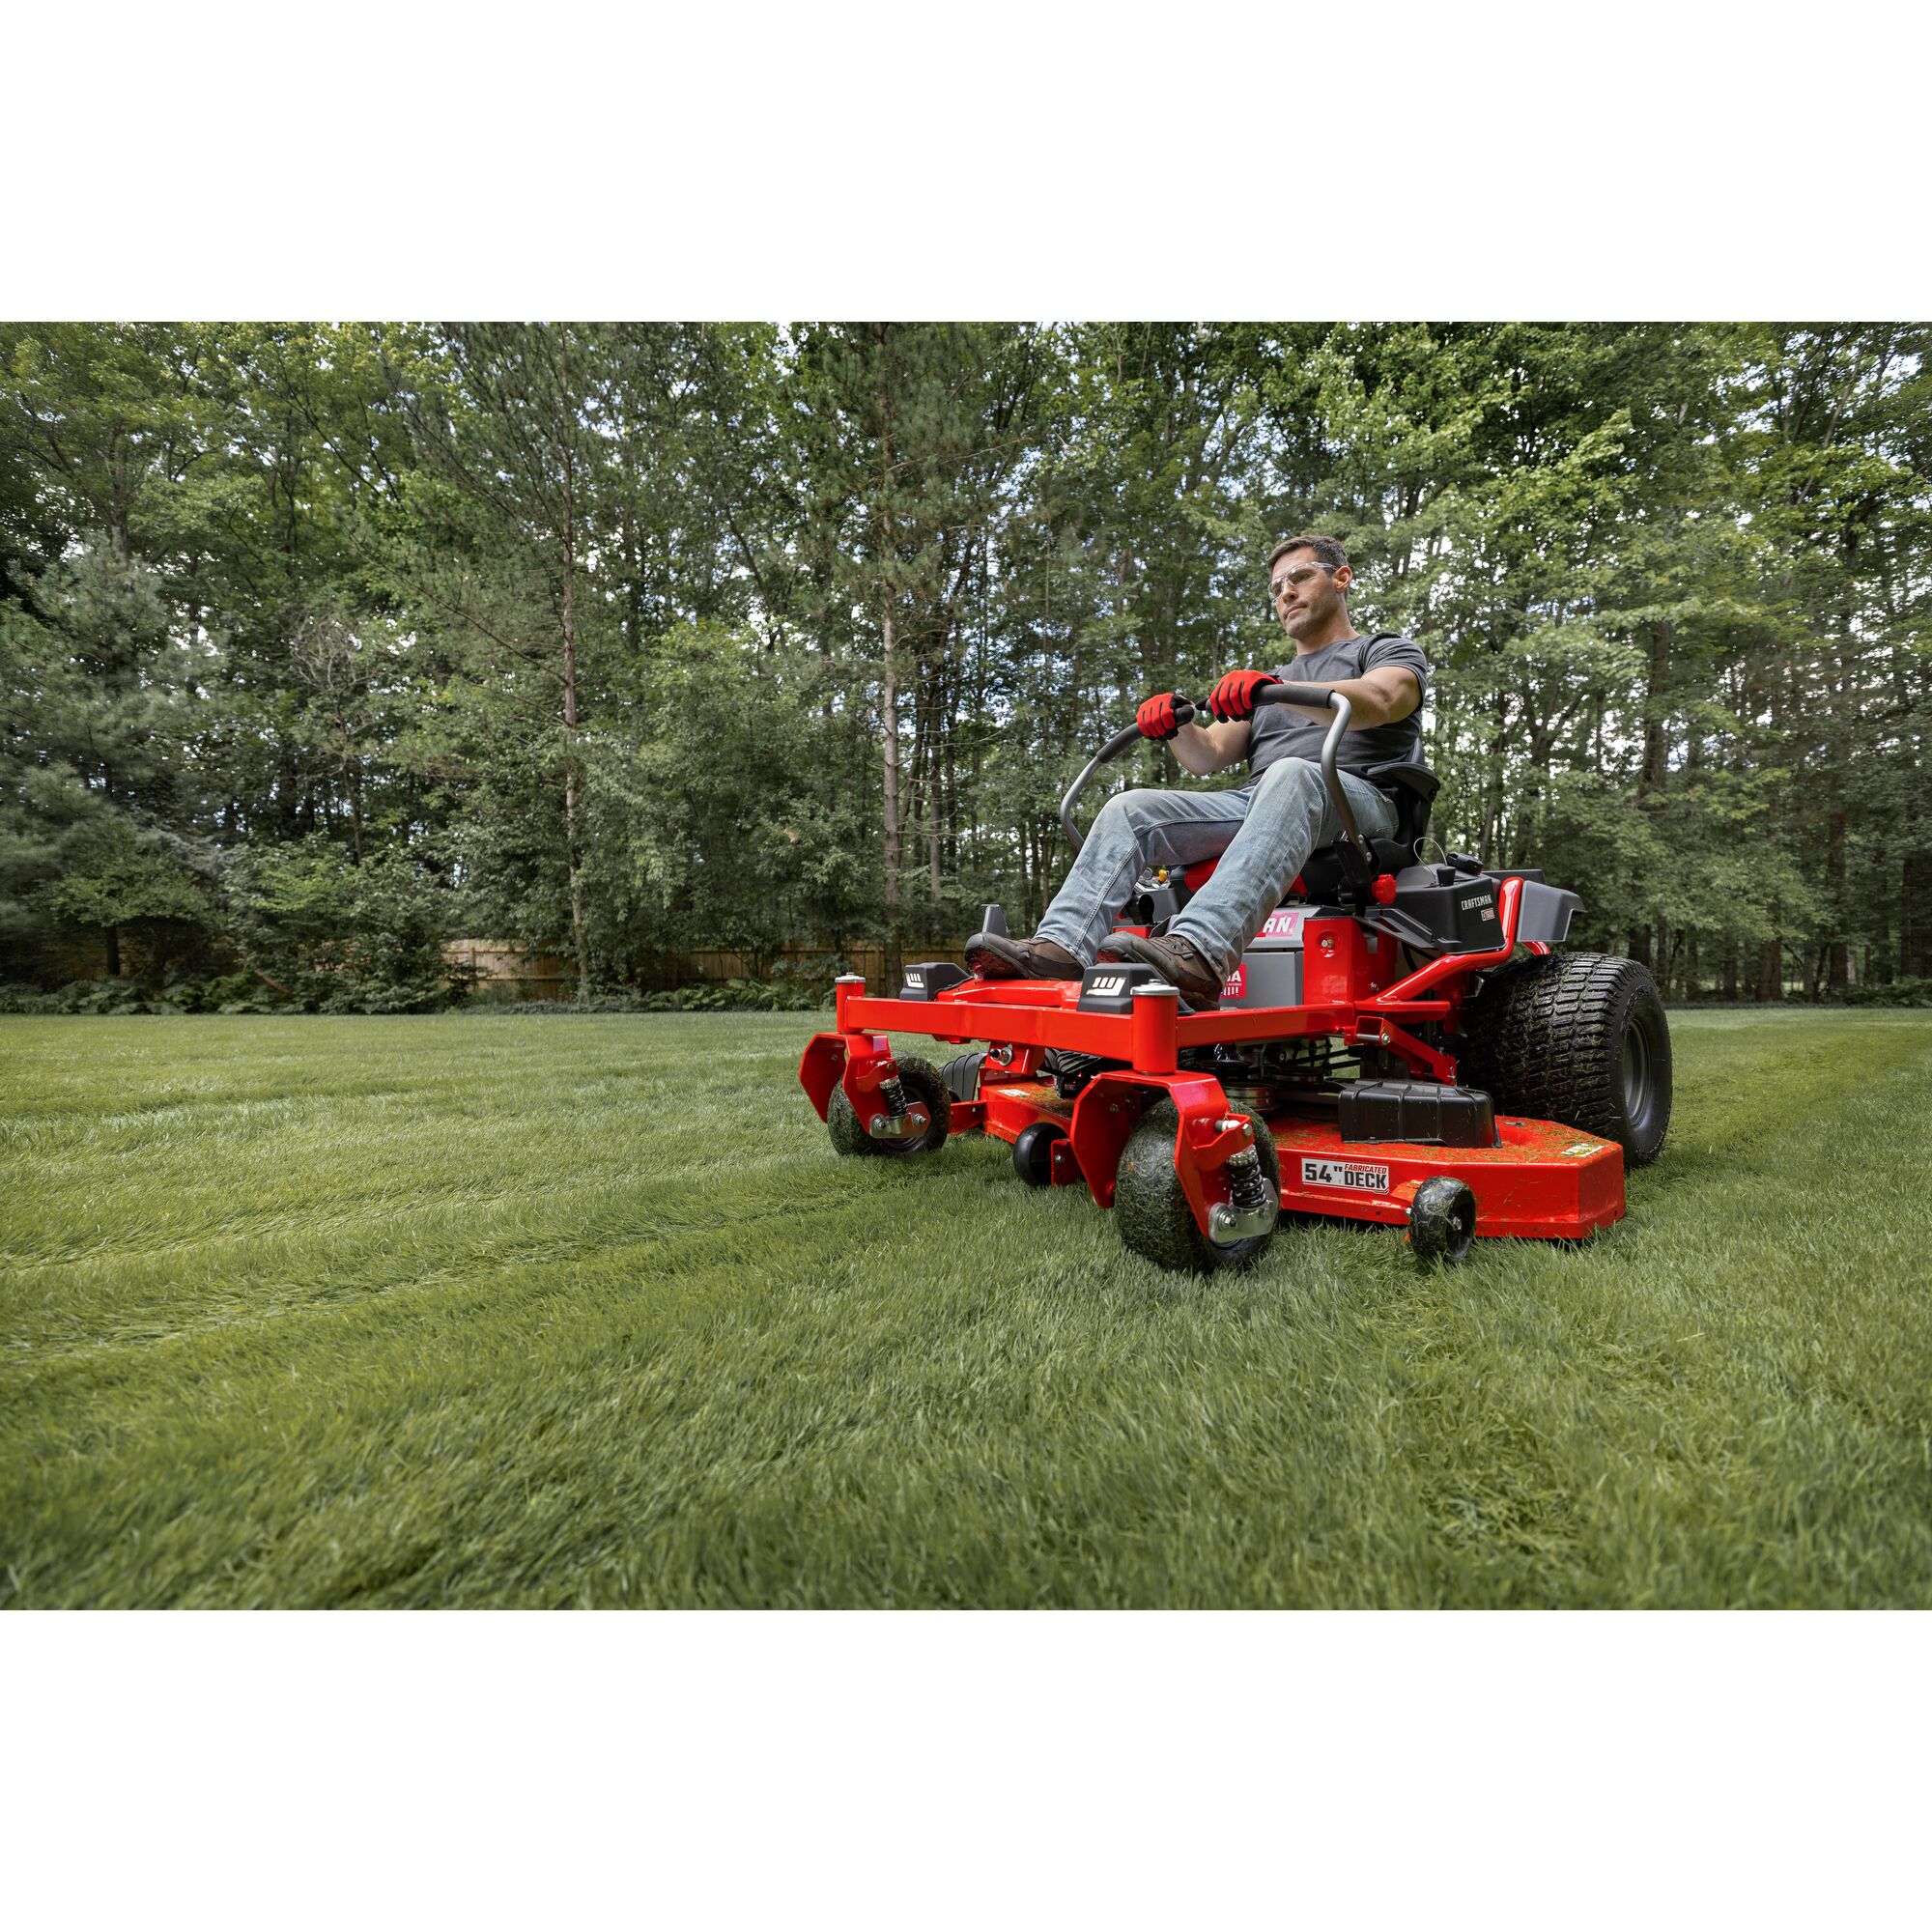 CRAFTSMAN Z7600 Gas Zero-Turn Mower mowing grass with wooded area in the background